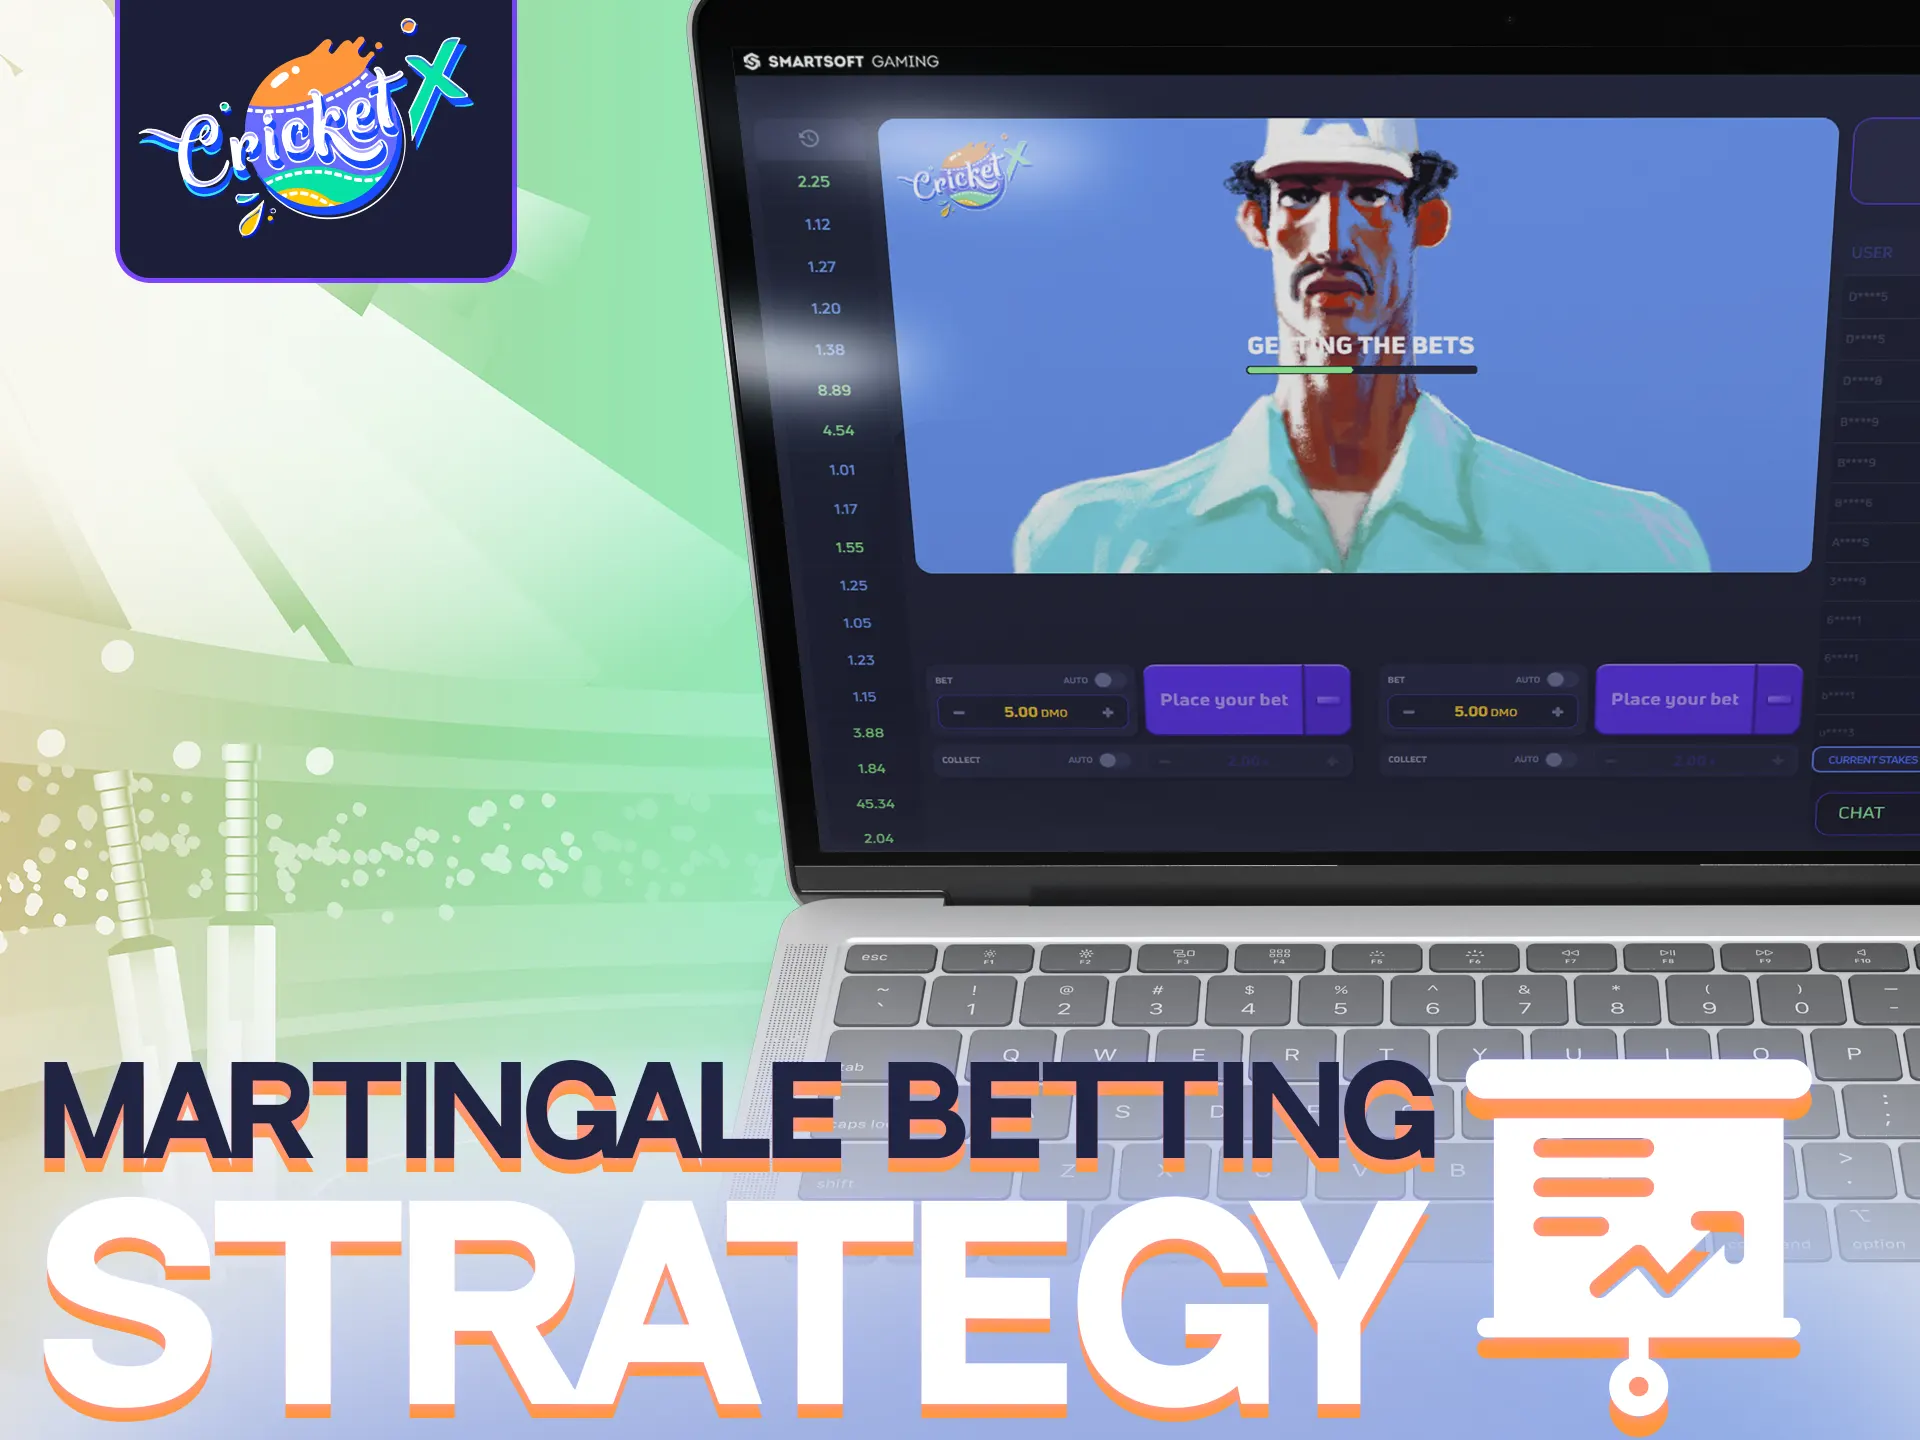 Double your bet with each loss with the Martingale strategy for the Cricket-X!